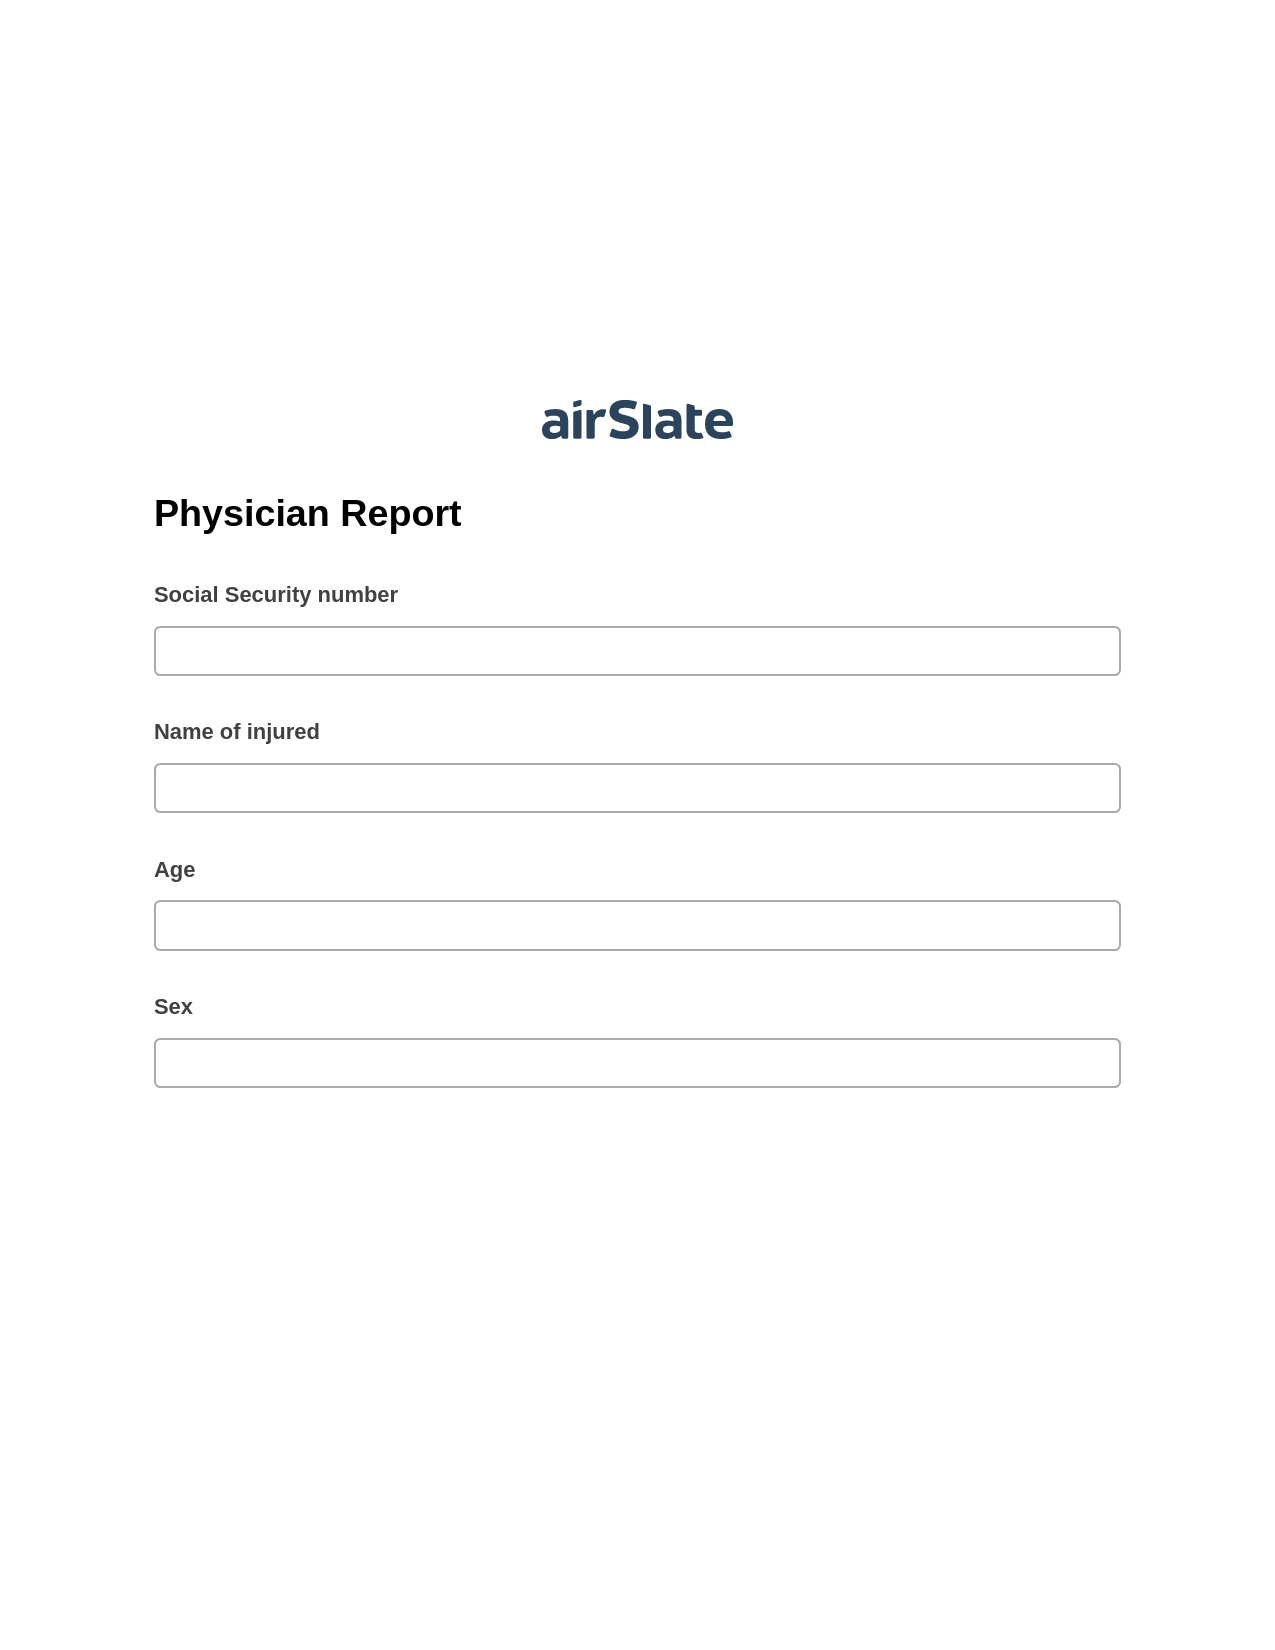 Multirole Physician Report Pre-fill Dropdowns from Airtable, Create NetSuite Record bot, Archive to Dropbox Bot